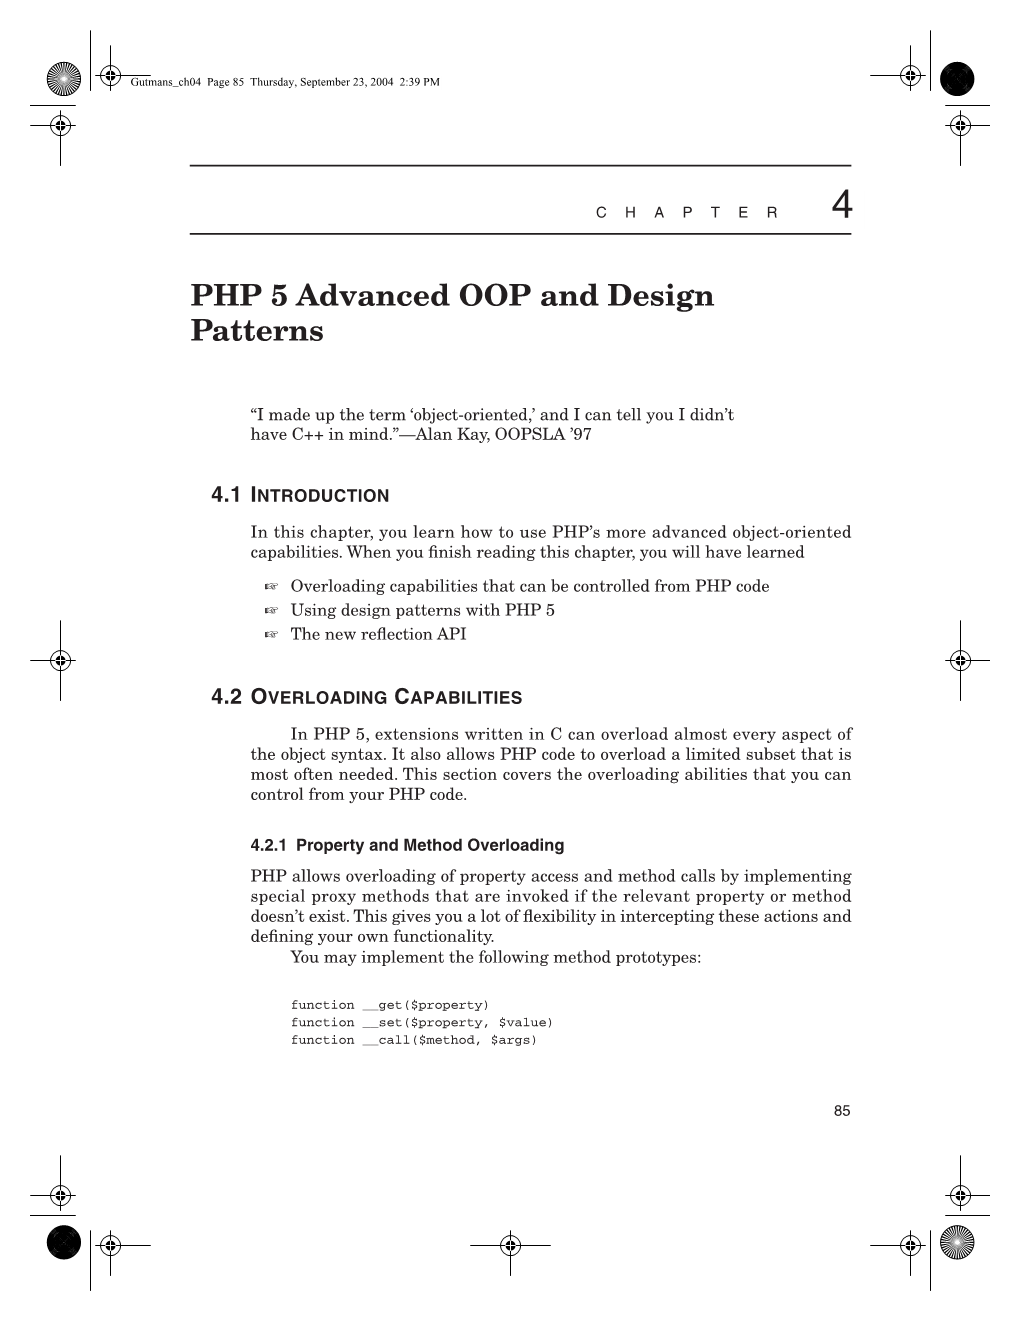 PHP 5 Advanced OOP and Design Patterns